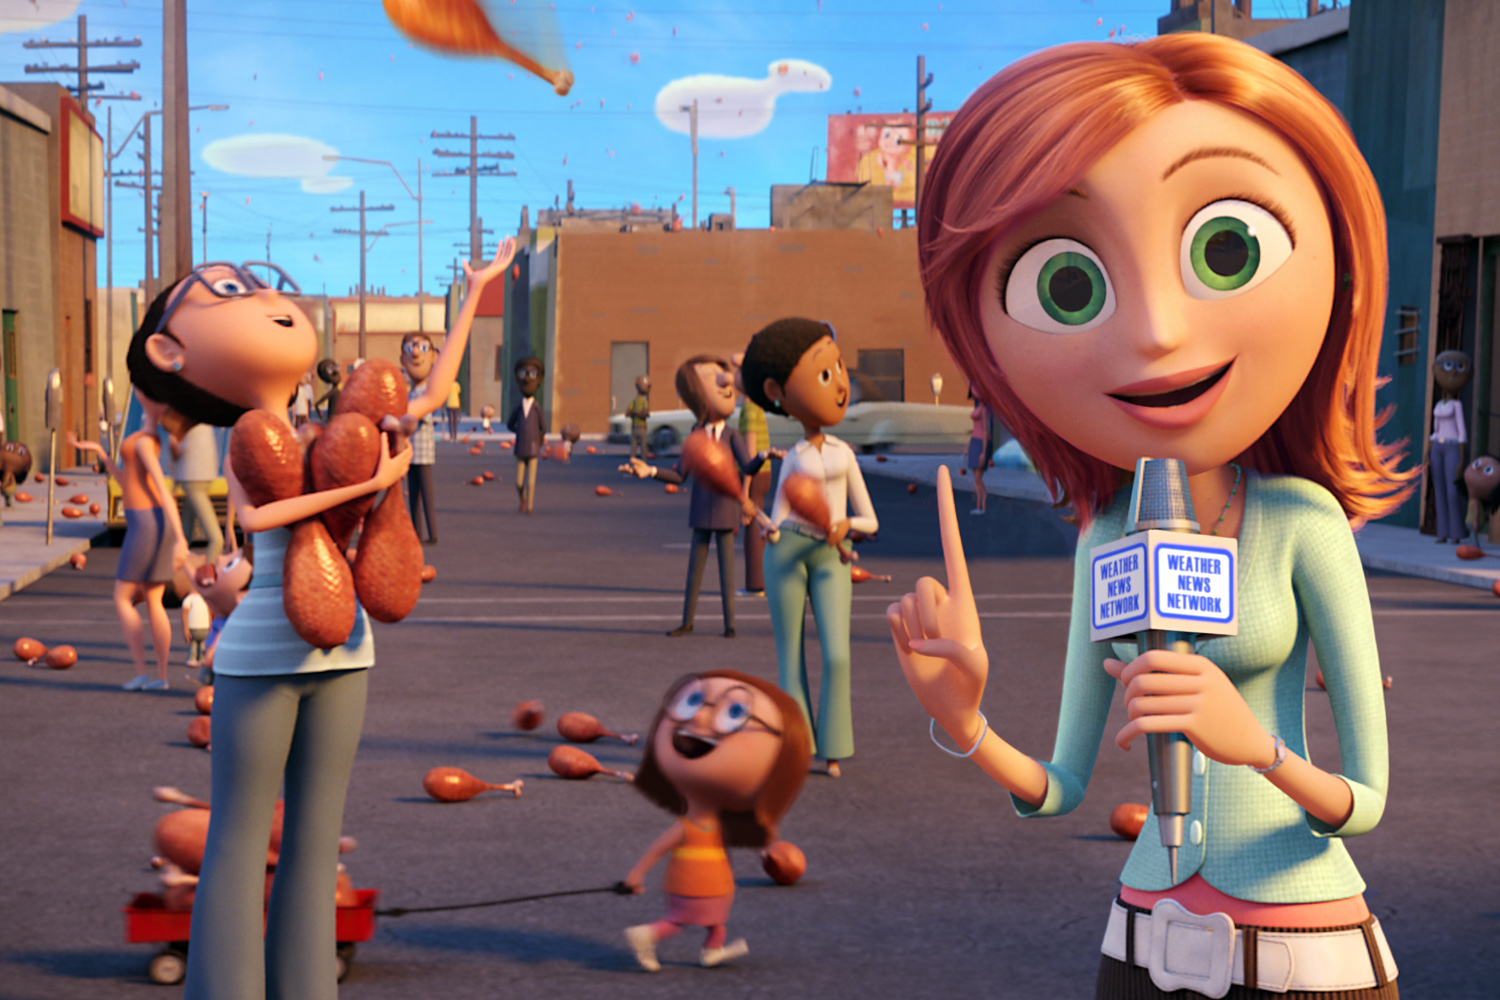 Cloudy With A Chance Of Meatballs HD wallpapers, Desktop wallpaper - most viewed